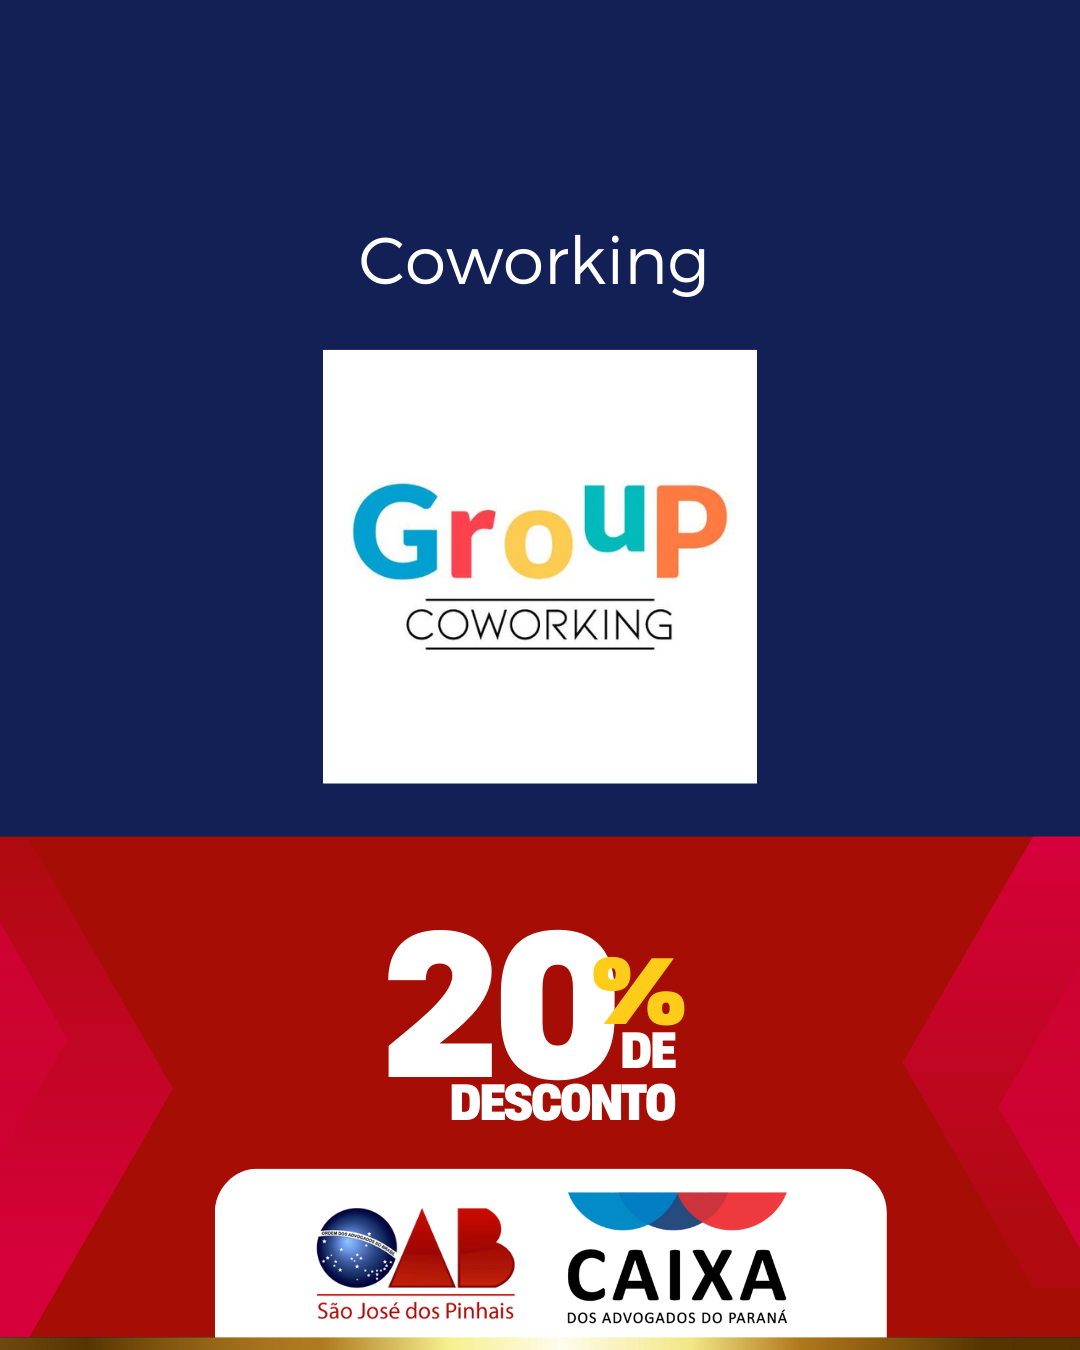 Group Coworking